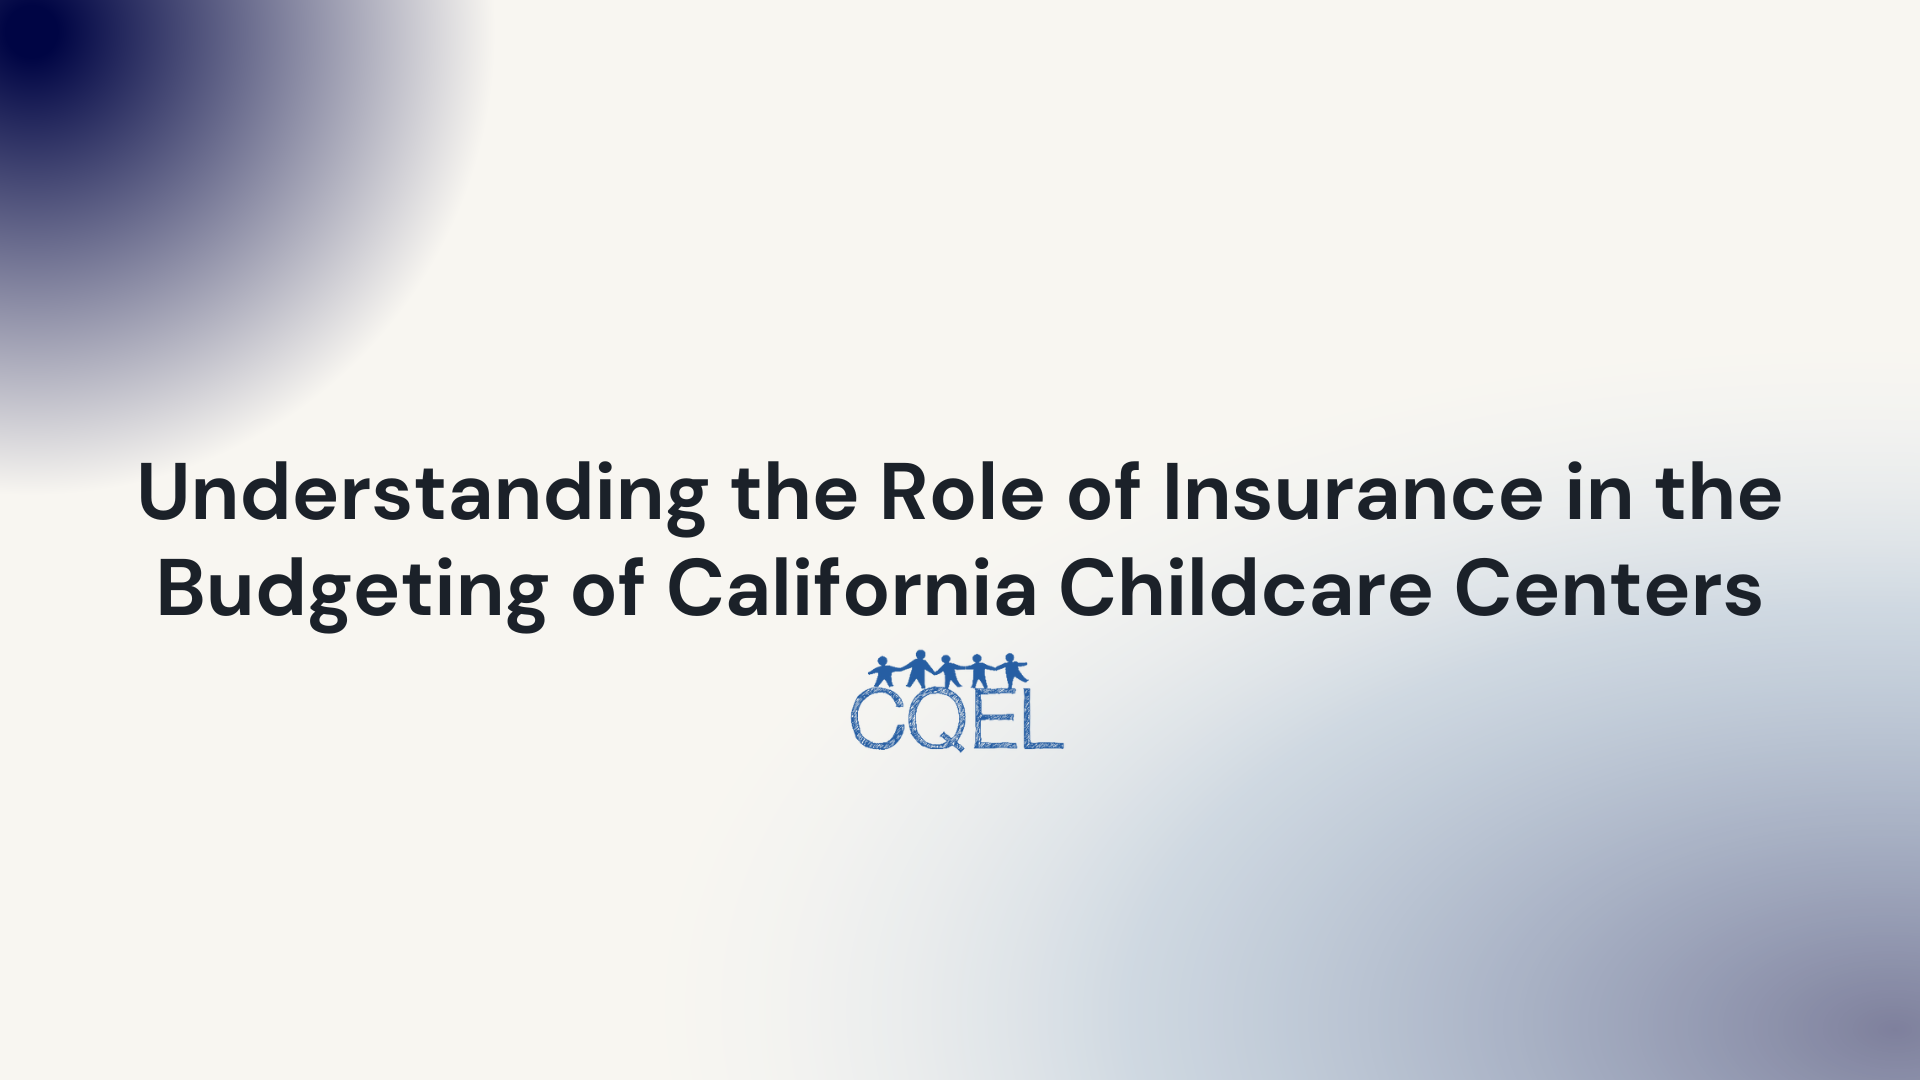 Understanding the Role of Insurance in the Budgeting of California Childcare Centers